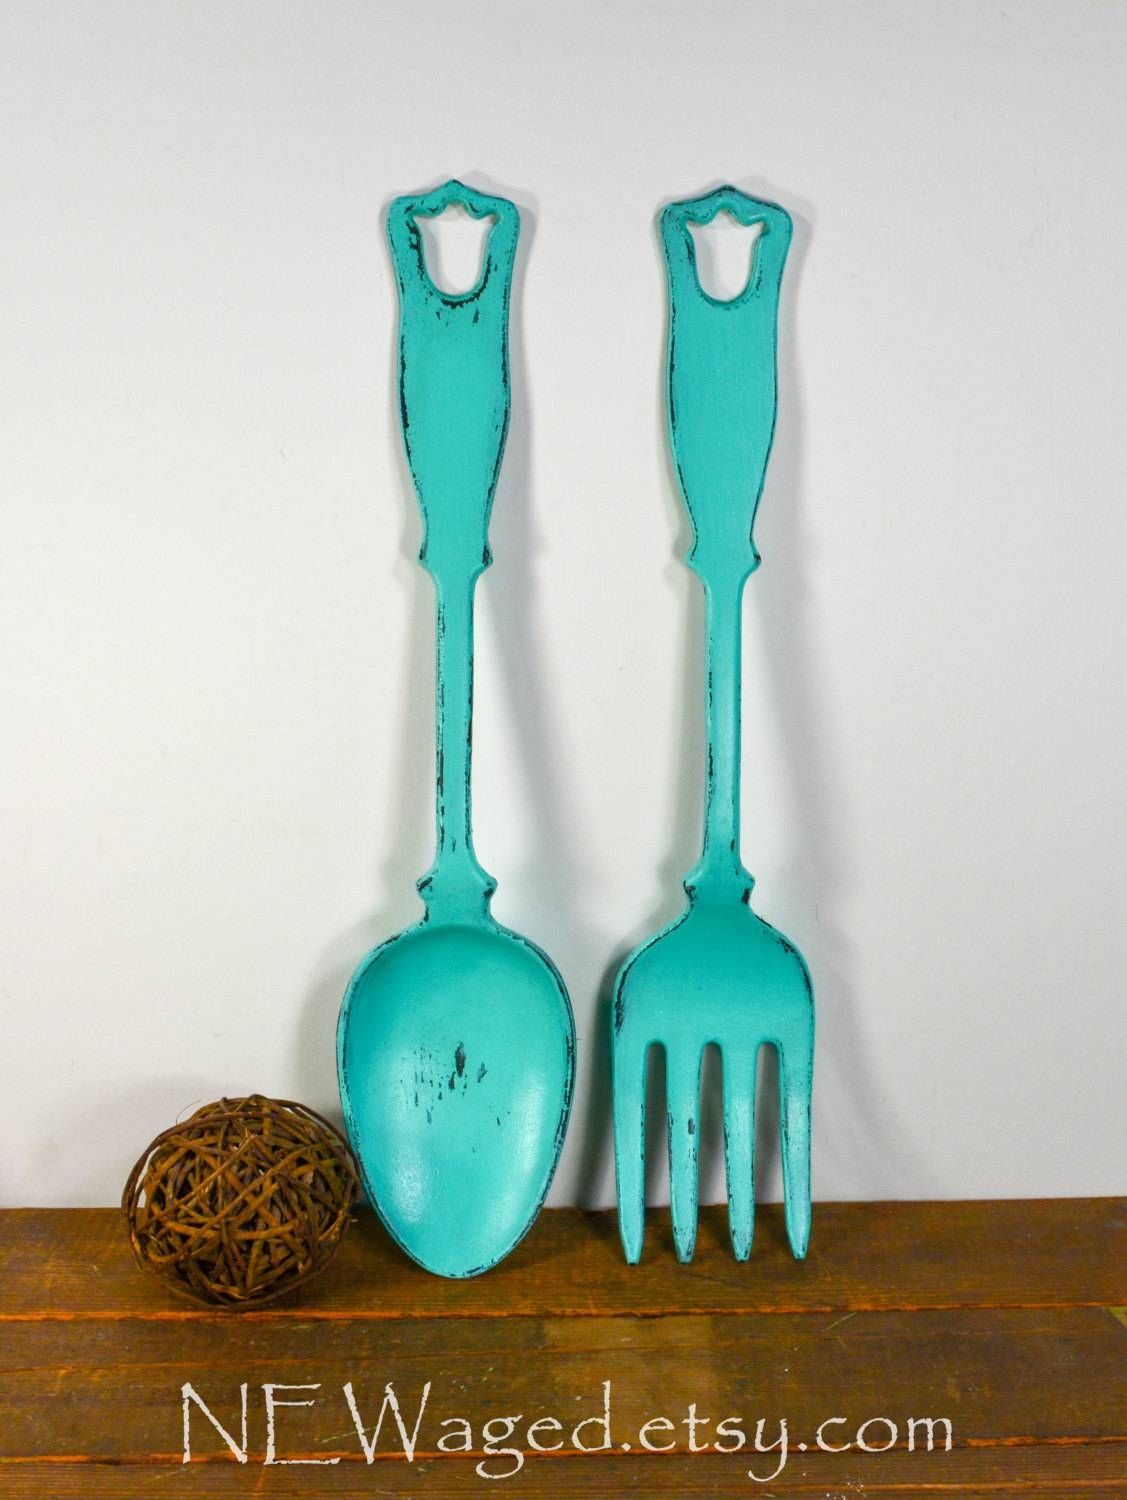 Oversized Spoon And Fork Wall Decor | Home Decor And Design With Most Recent Big Spoon And Fork Wall Decor (View 26 of 30)